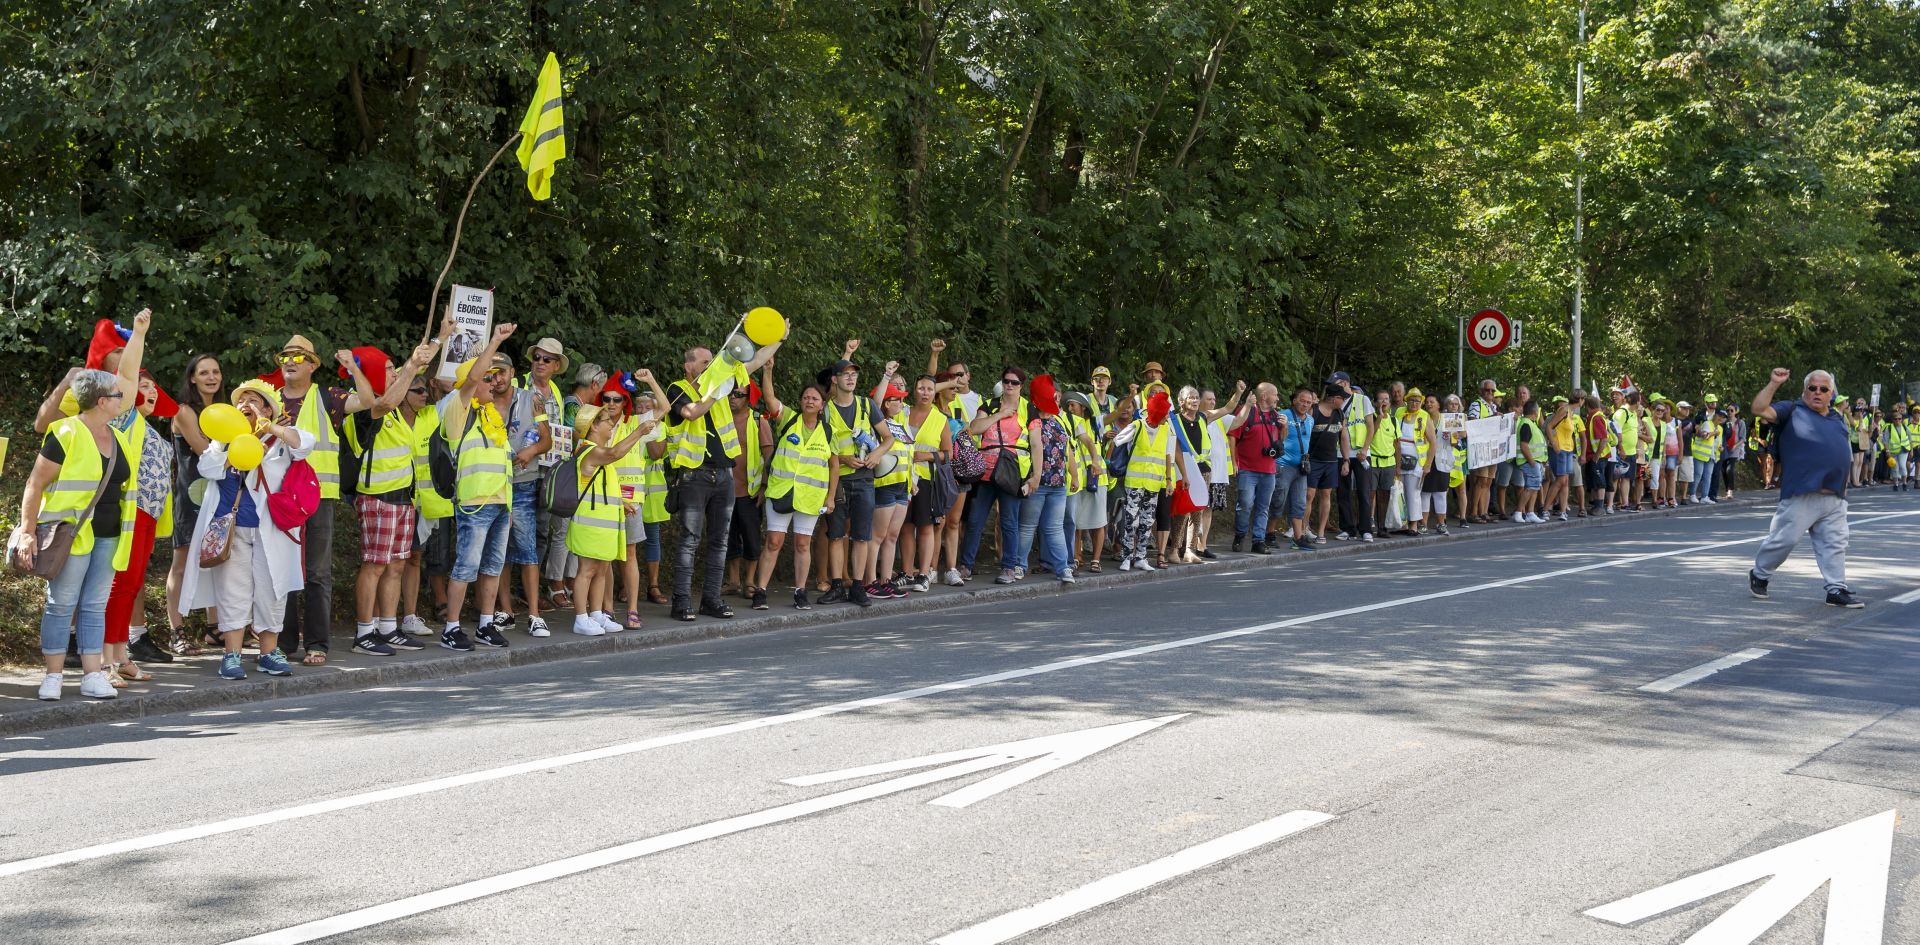 epa07807650 Protesters from the 'Gilets Jaunes' (Yellow Vests) movement hold hands standing on the road during a demonstration, in Geneva, Switzerland, 31 August 2019.  EPA/SALVATORE DI NOLFI